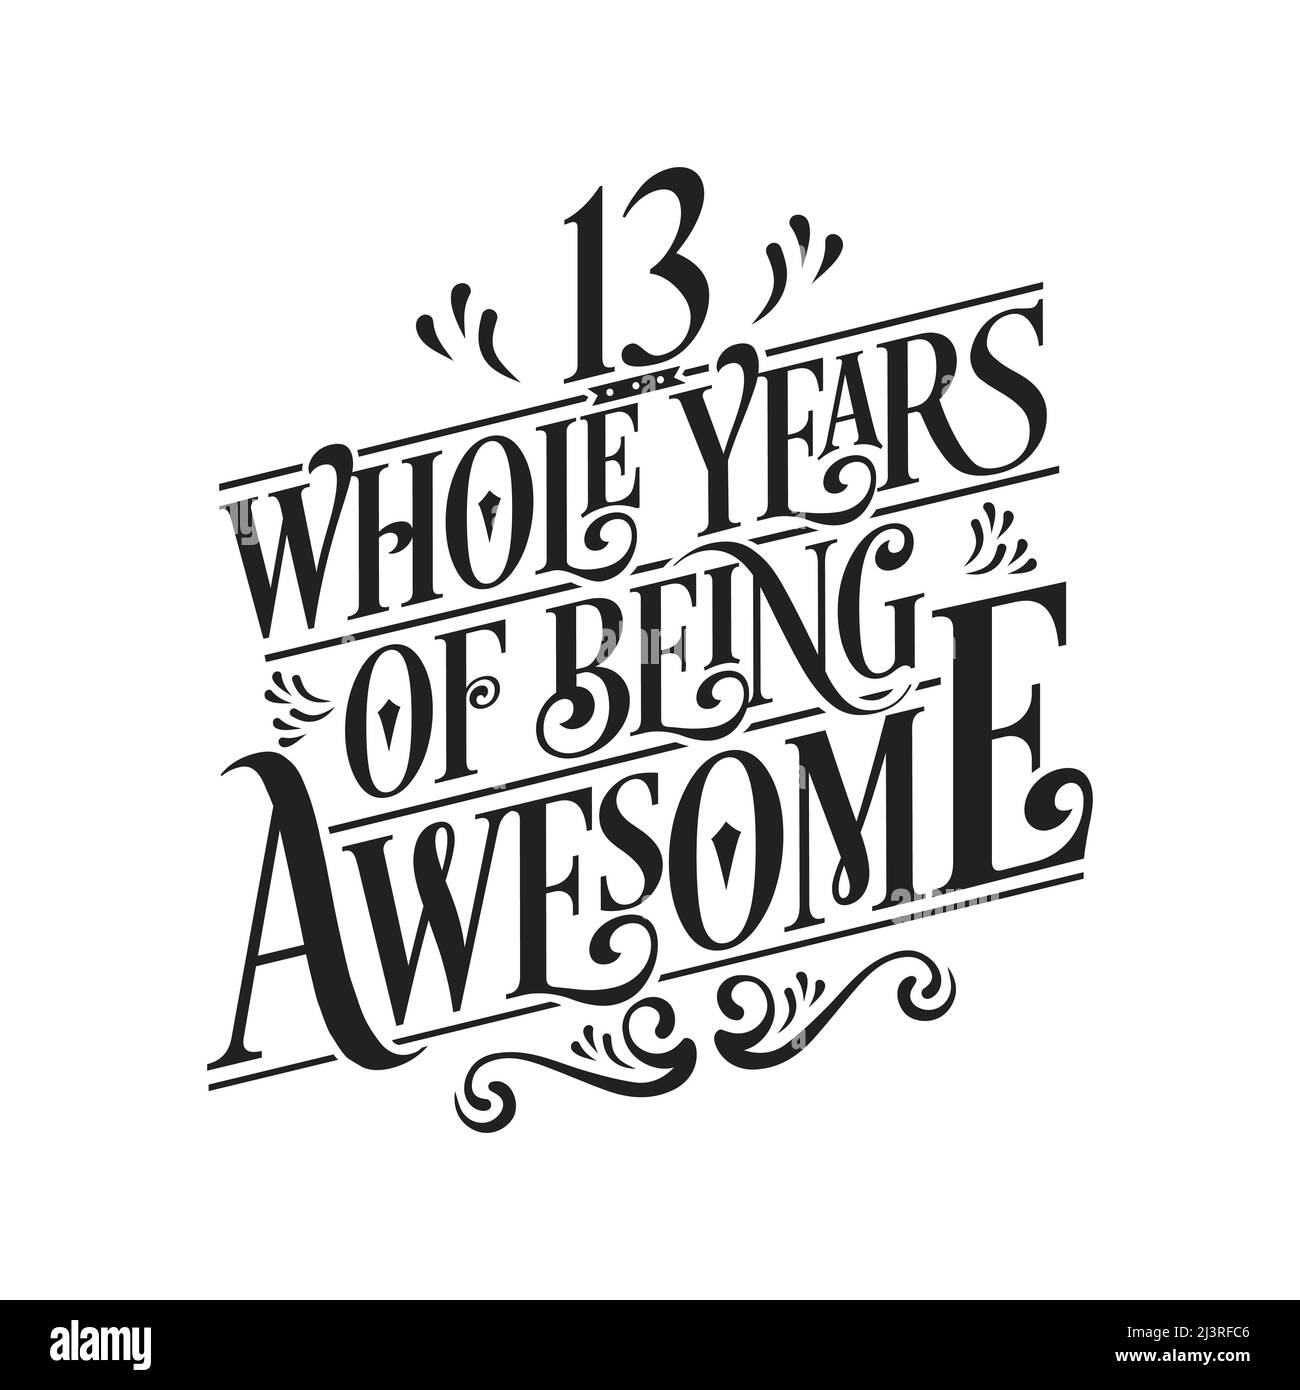 13 whole years of being awesome. 13th birthday celebration lettering Stock Vector